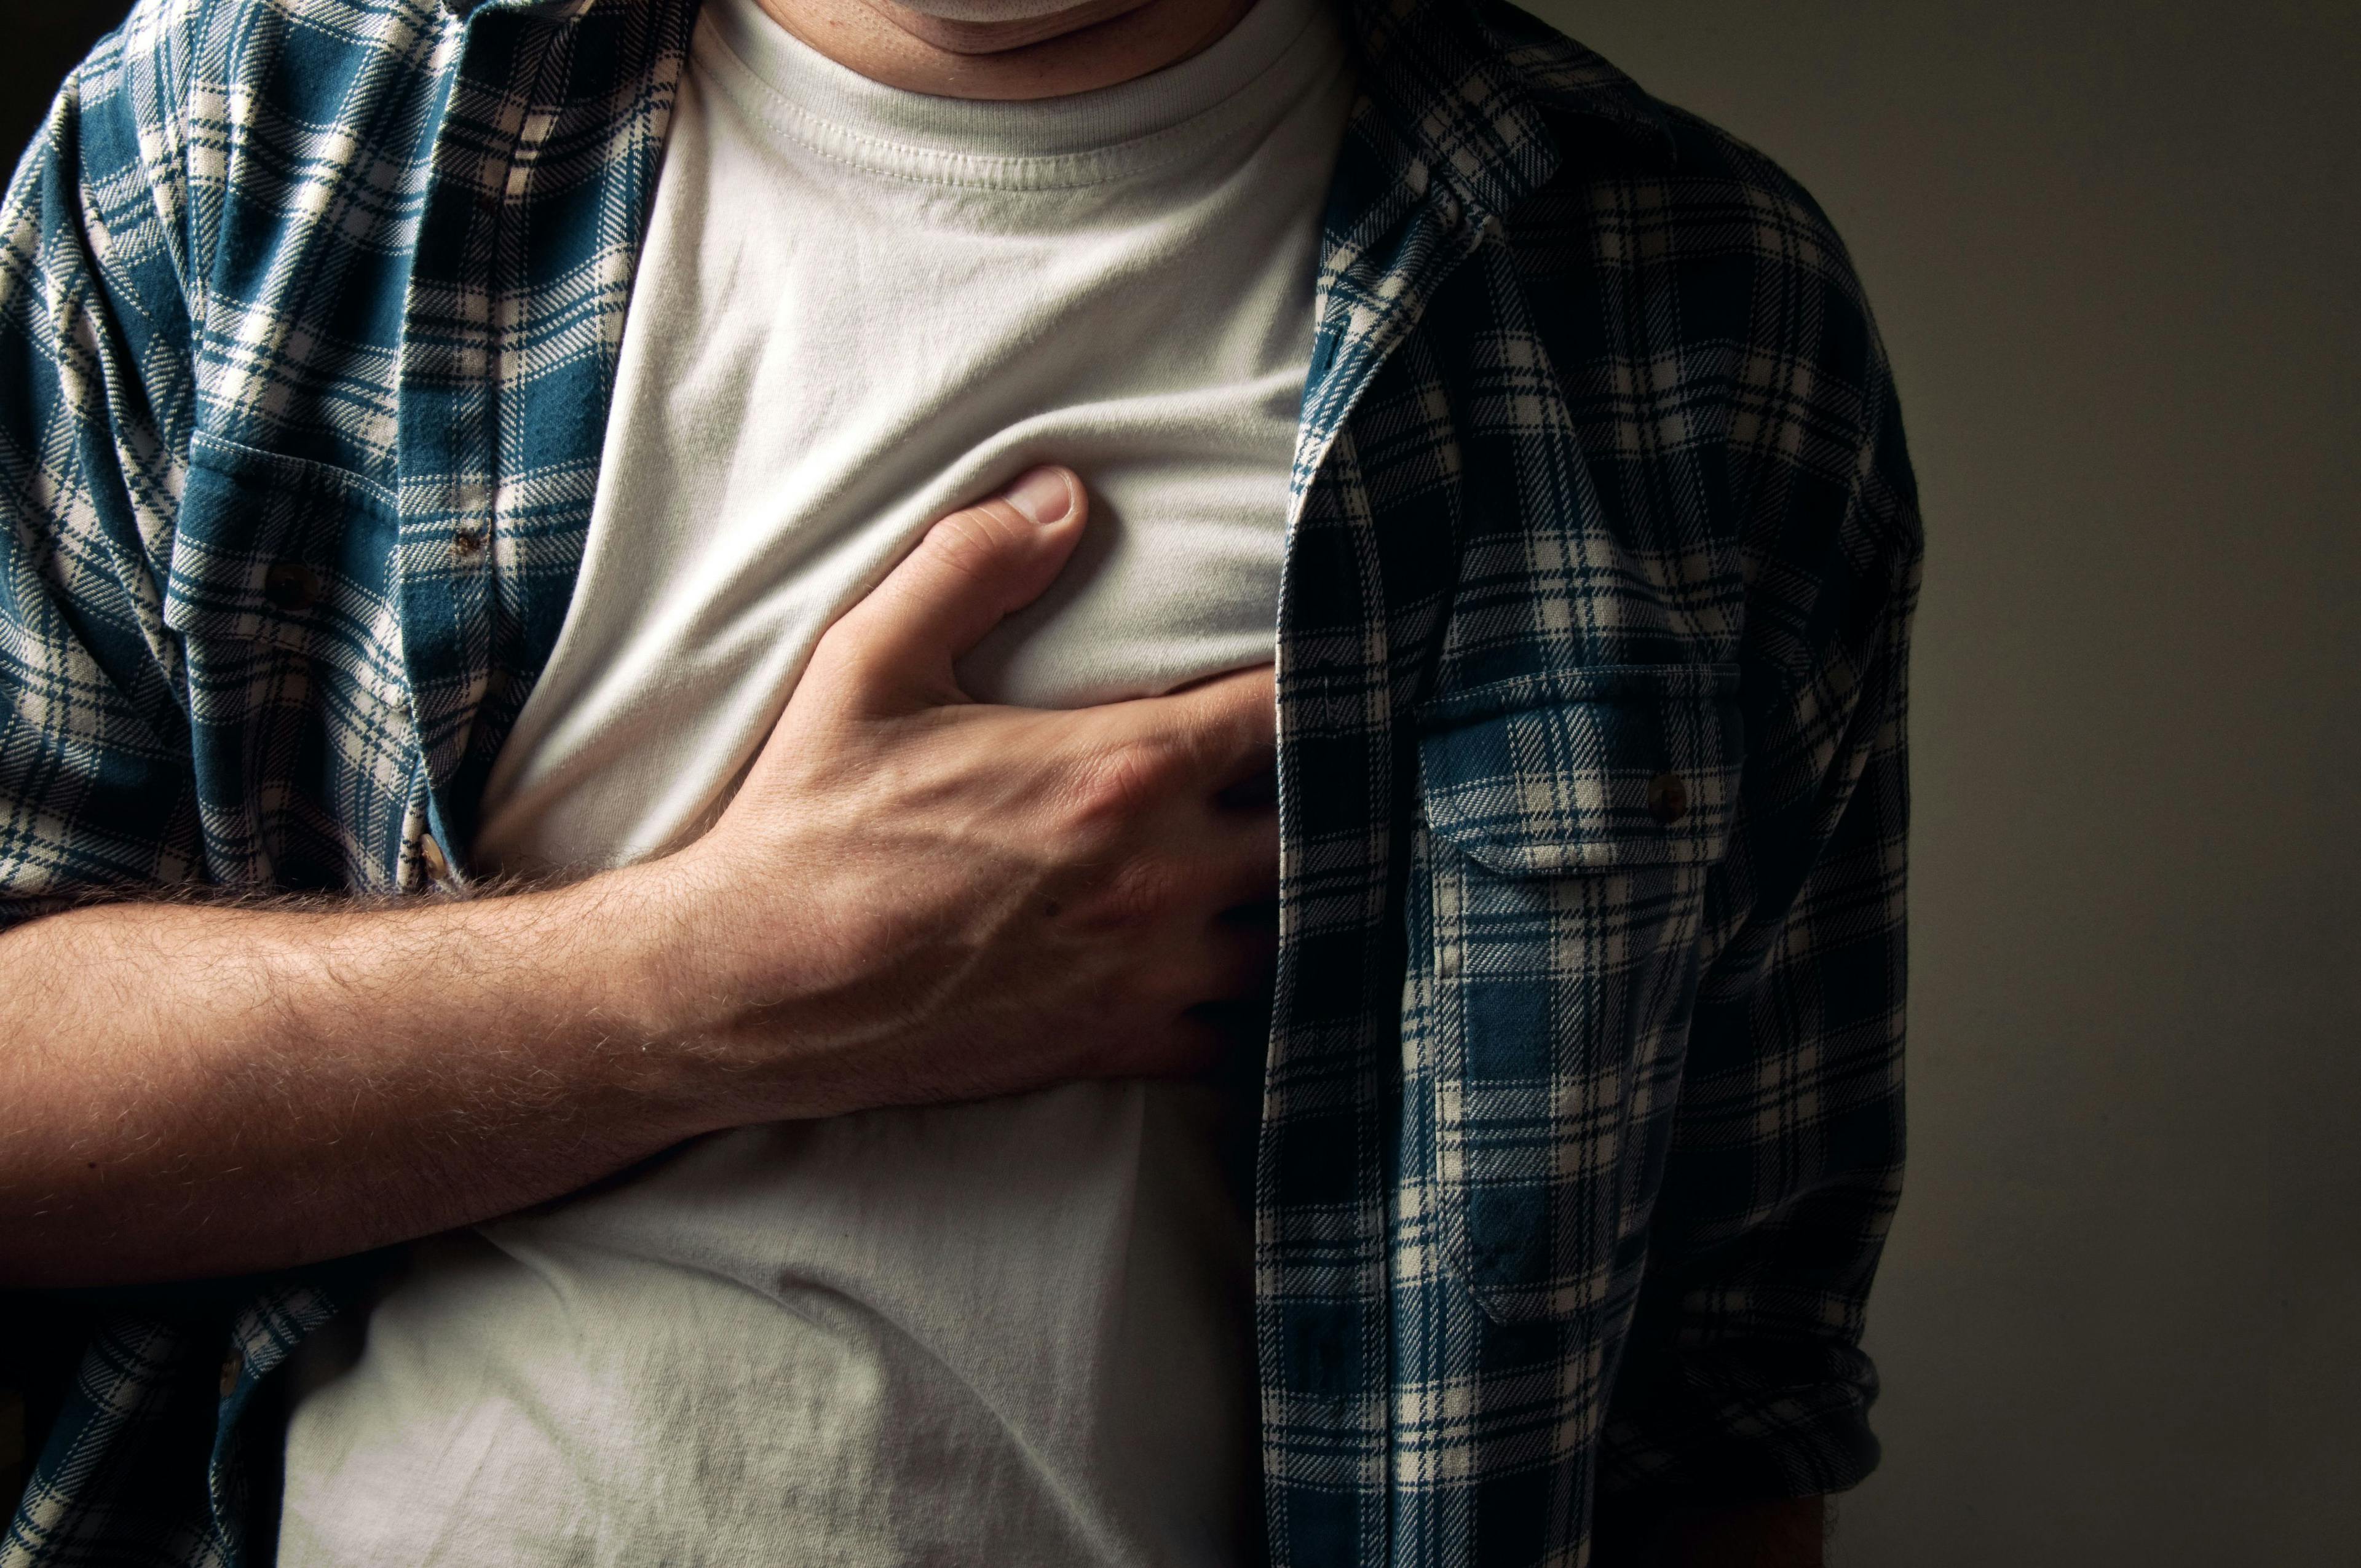 A man gripping his chest due to heart pain.